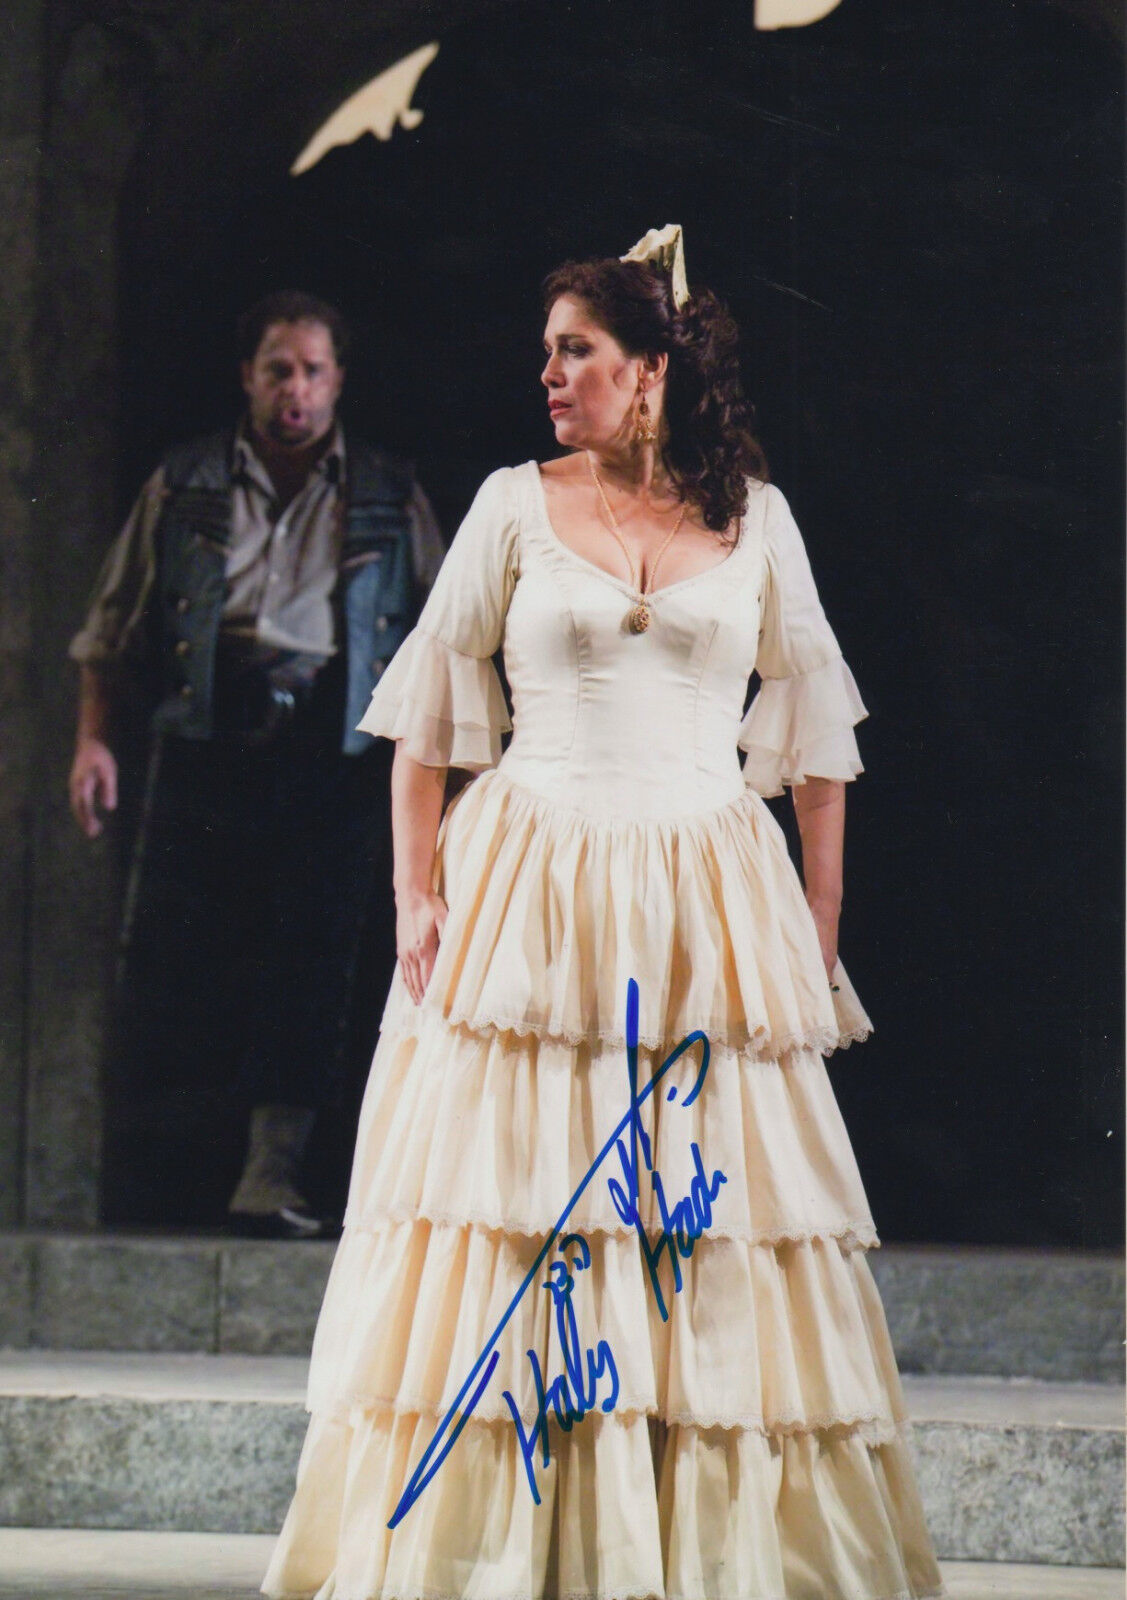 Hadar Halevy Opera signed 8x12 inch Photo Poster painting autograph